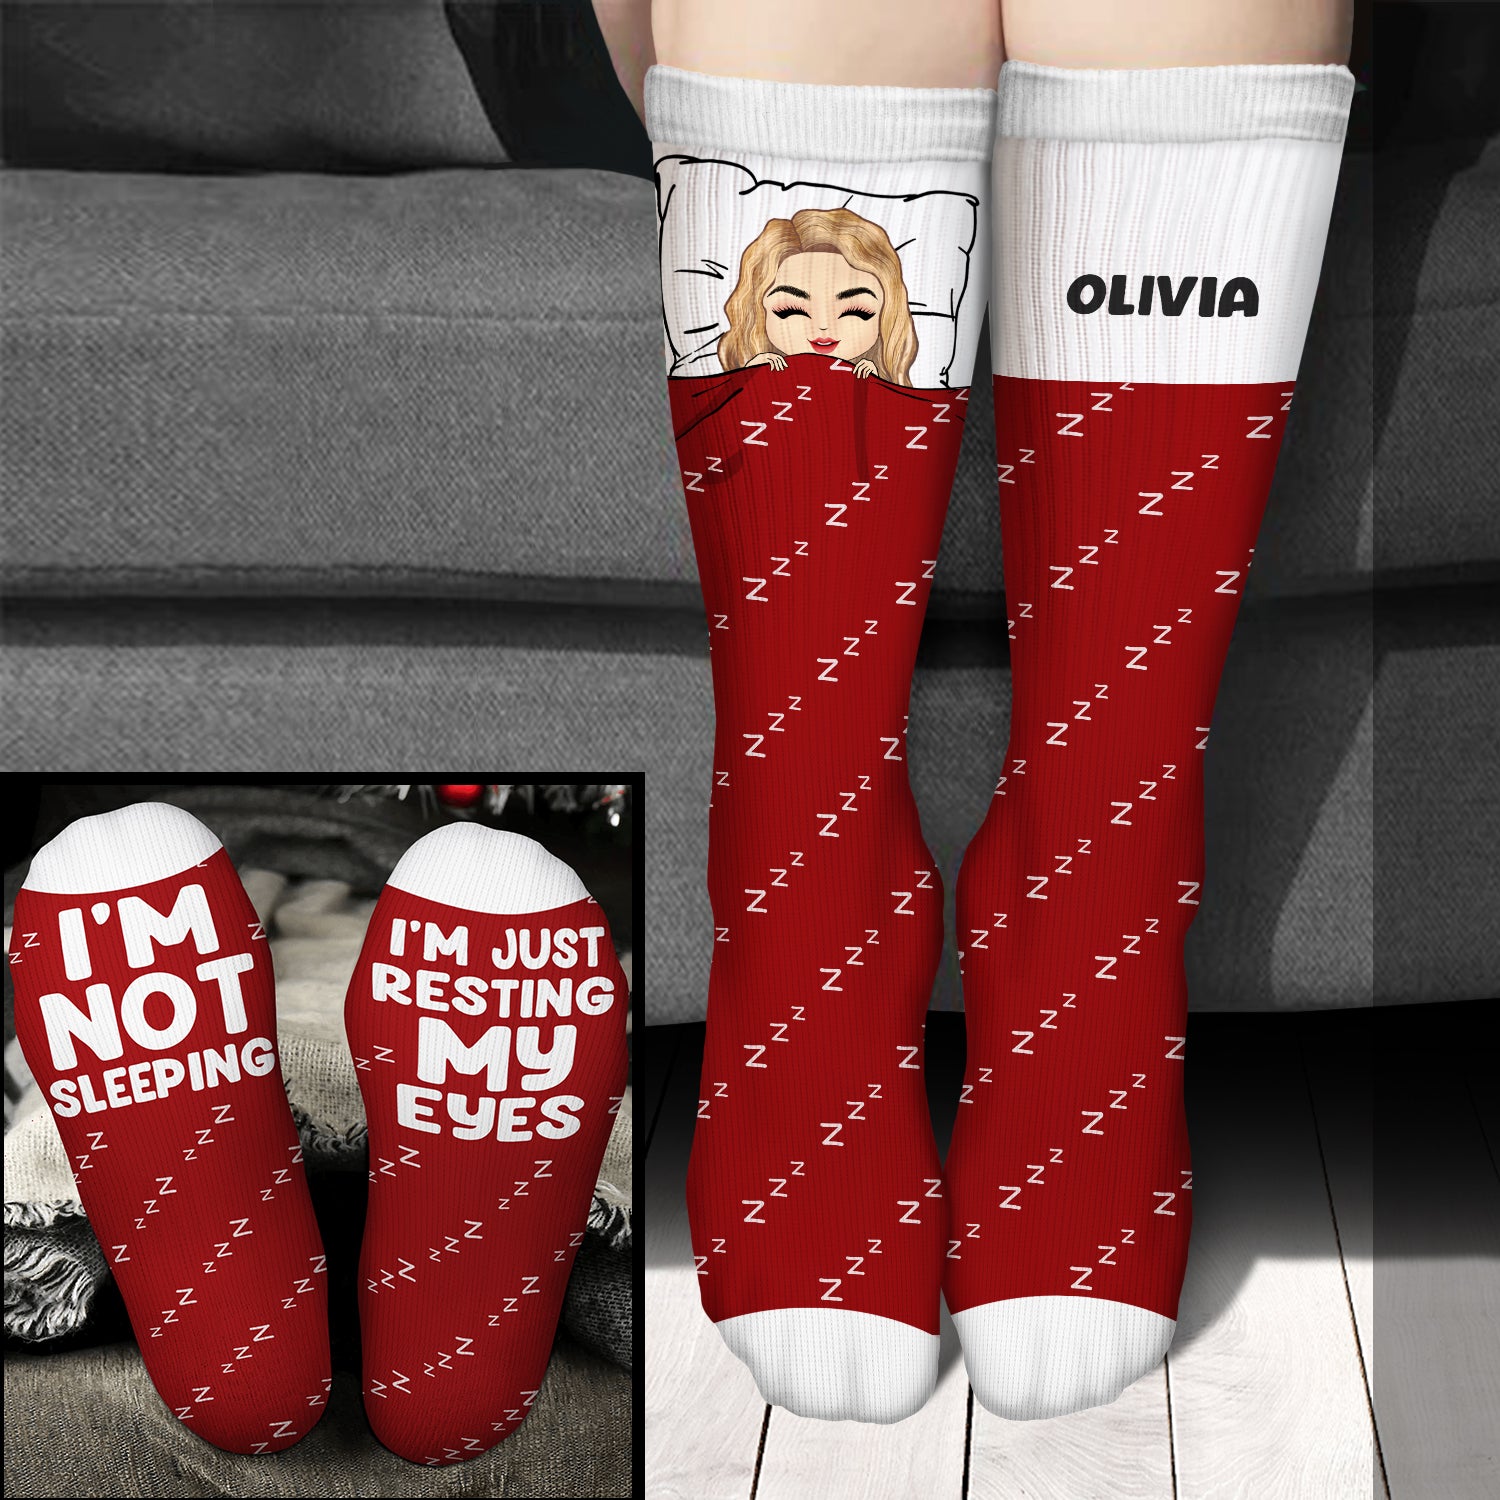 Just Resting My Eyes - Gift For Yourself - Personalized Socks